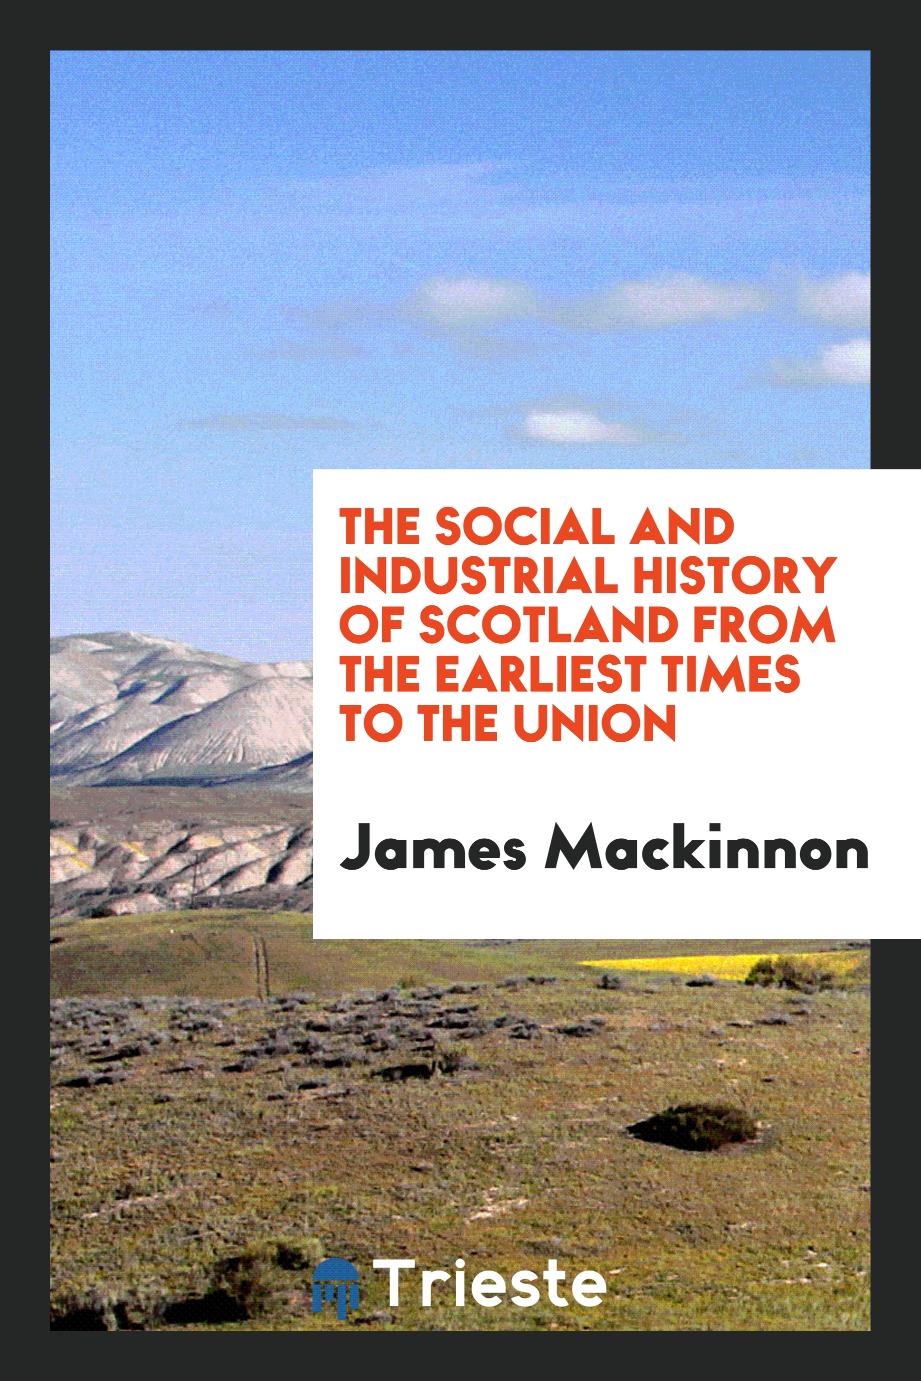 The social and industrial history of Scotland from the earliest times to the Union